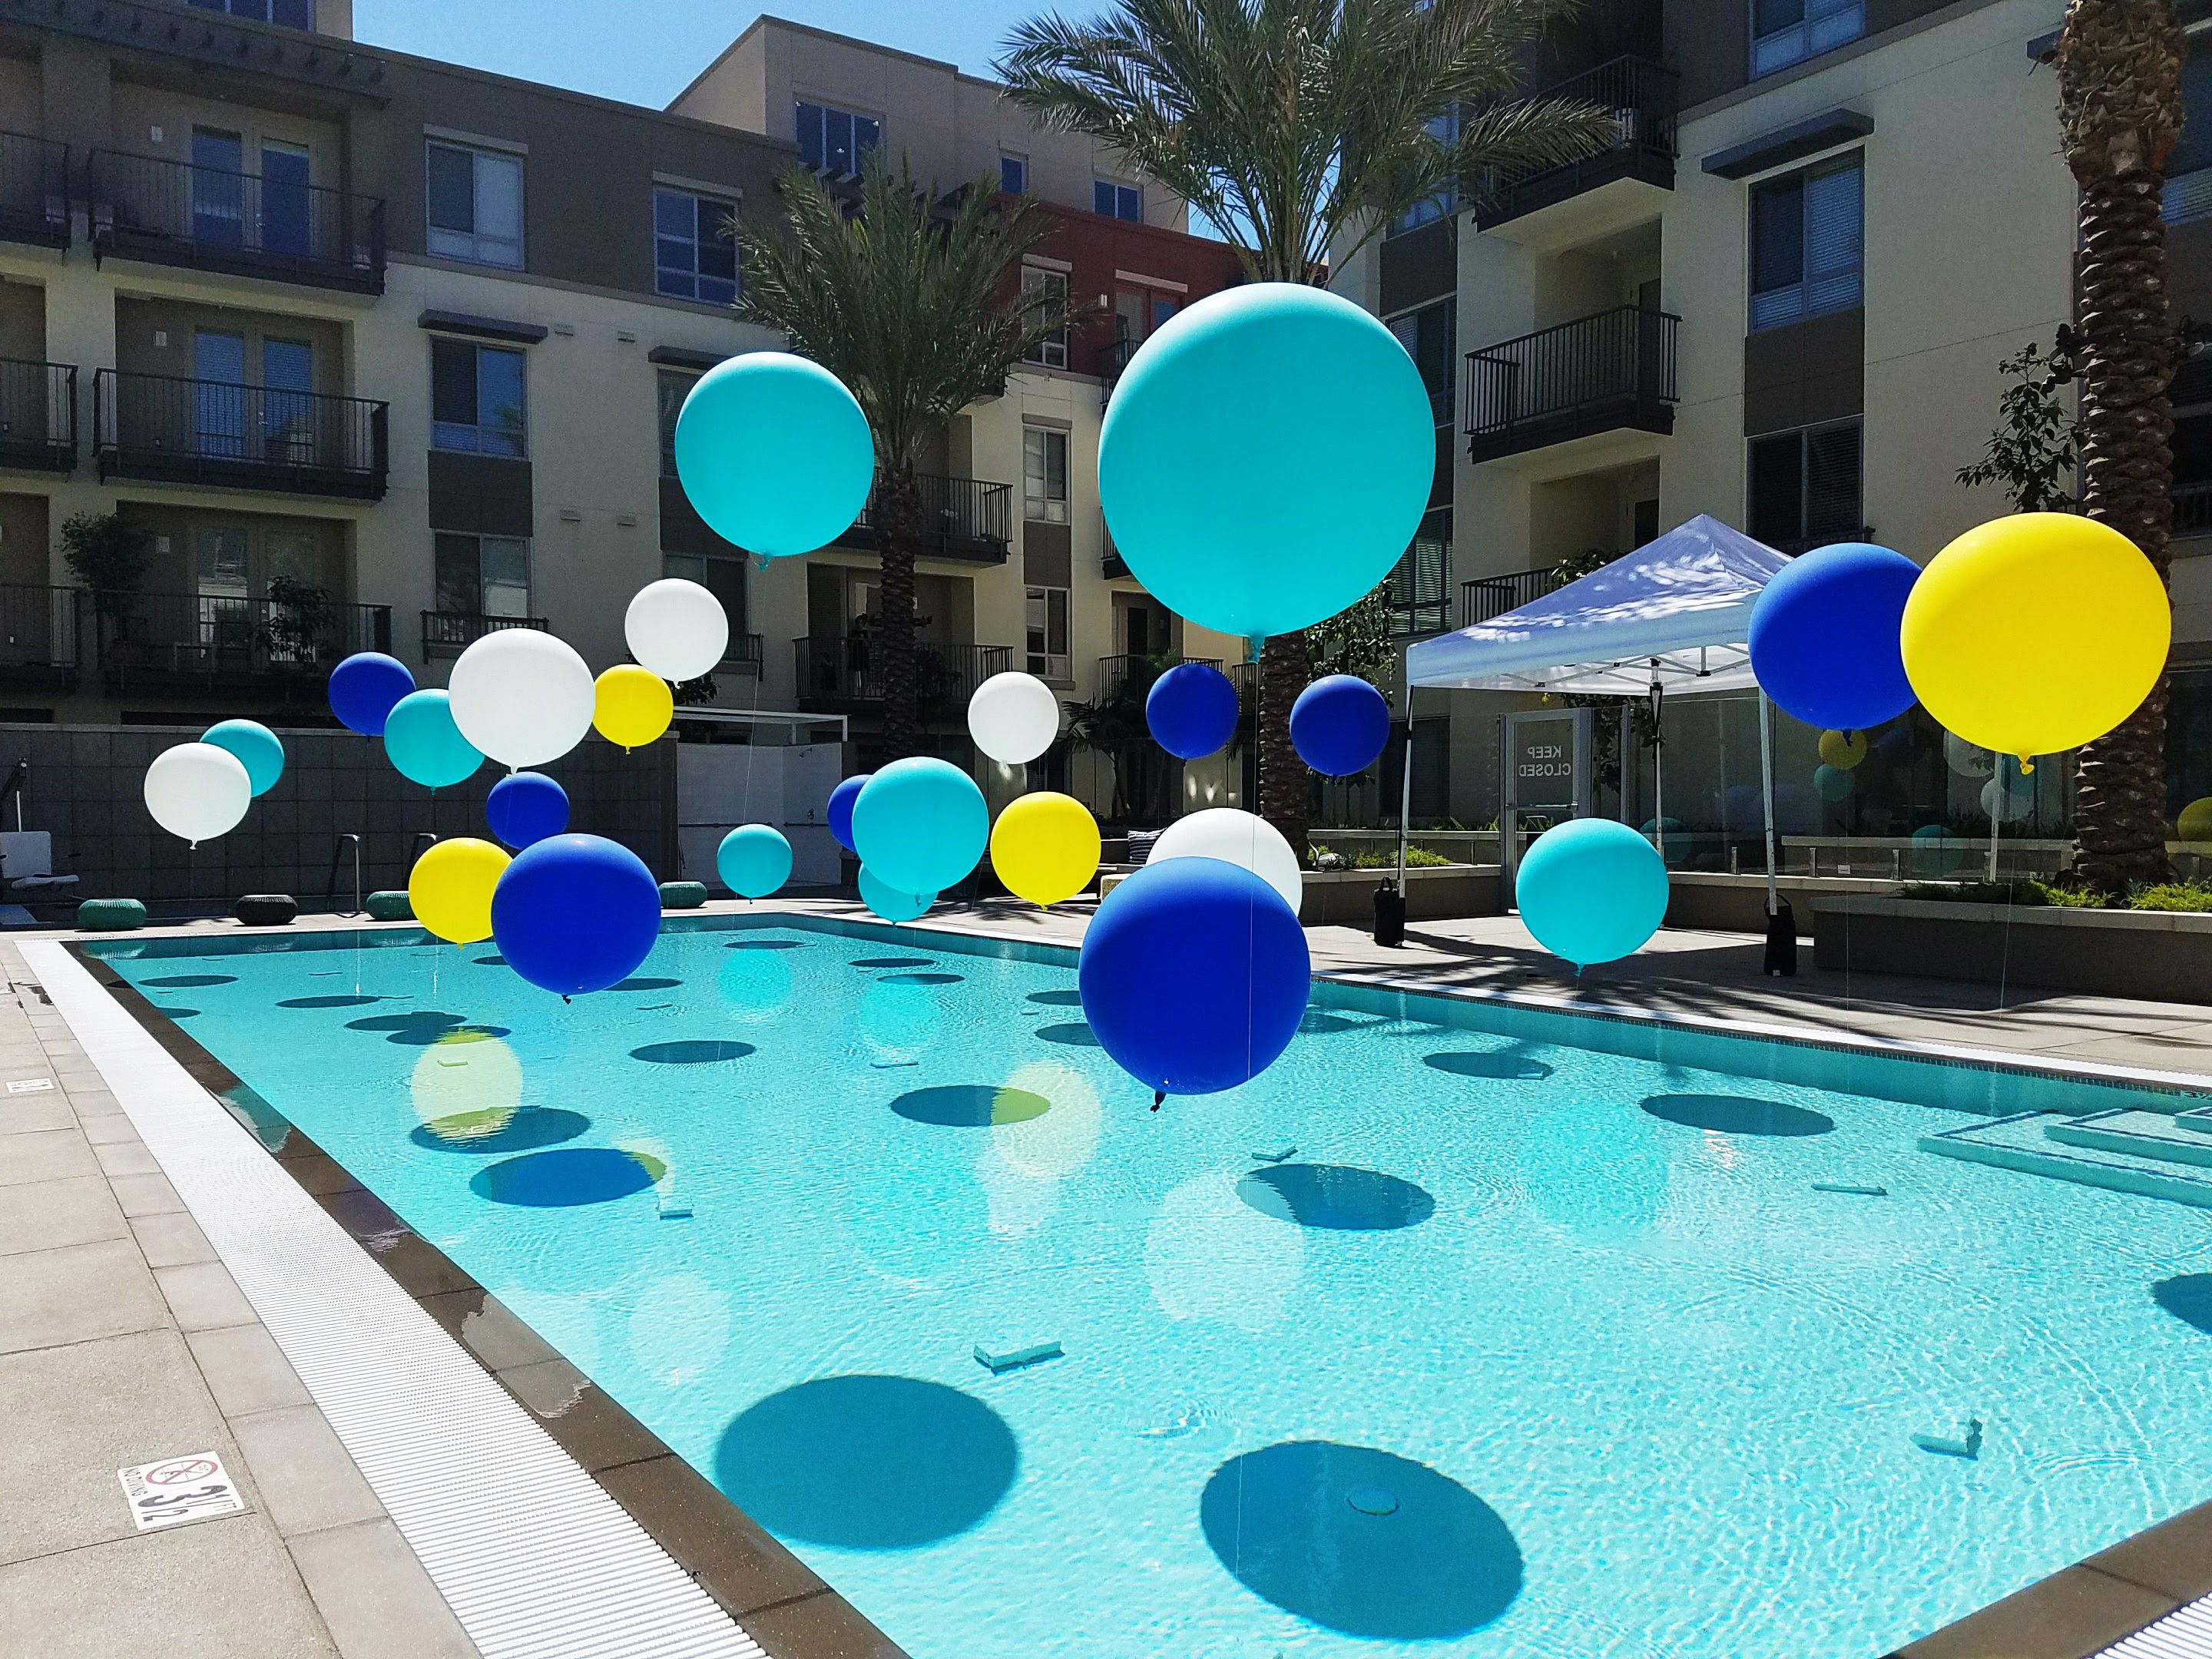 Pool balloons, summer party, pool party, party ideas | Backyard pool